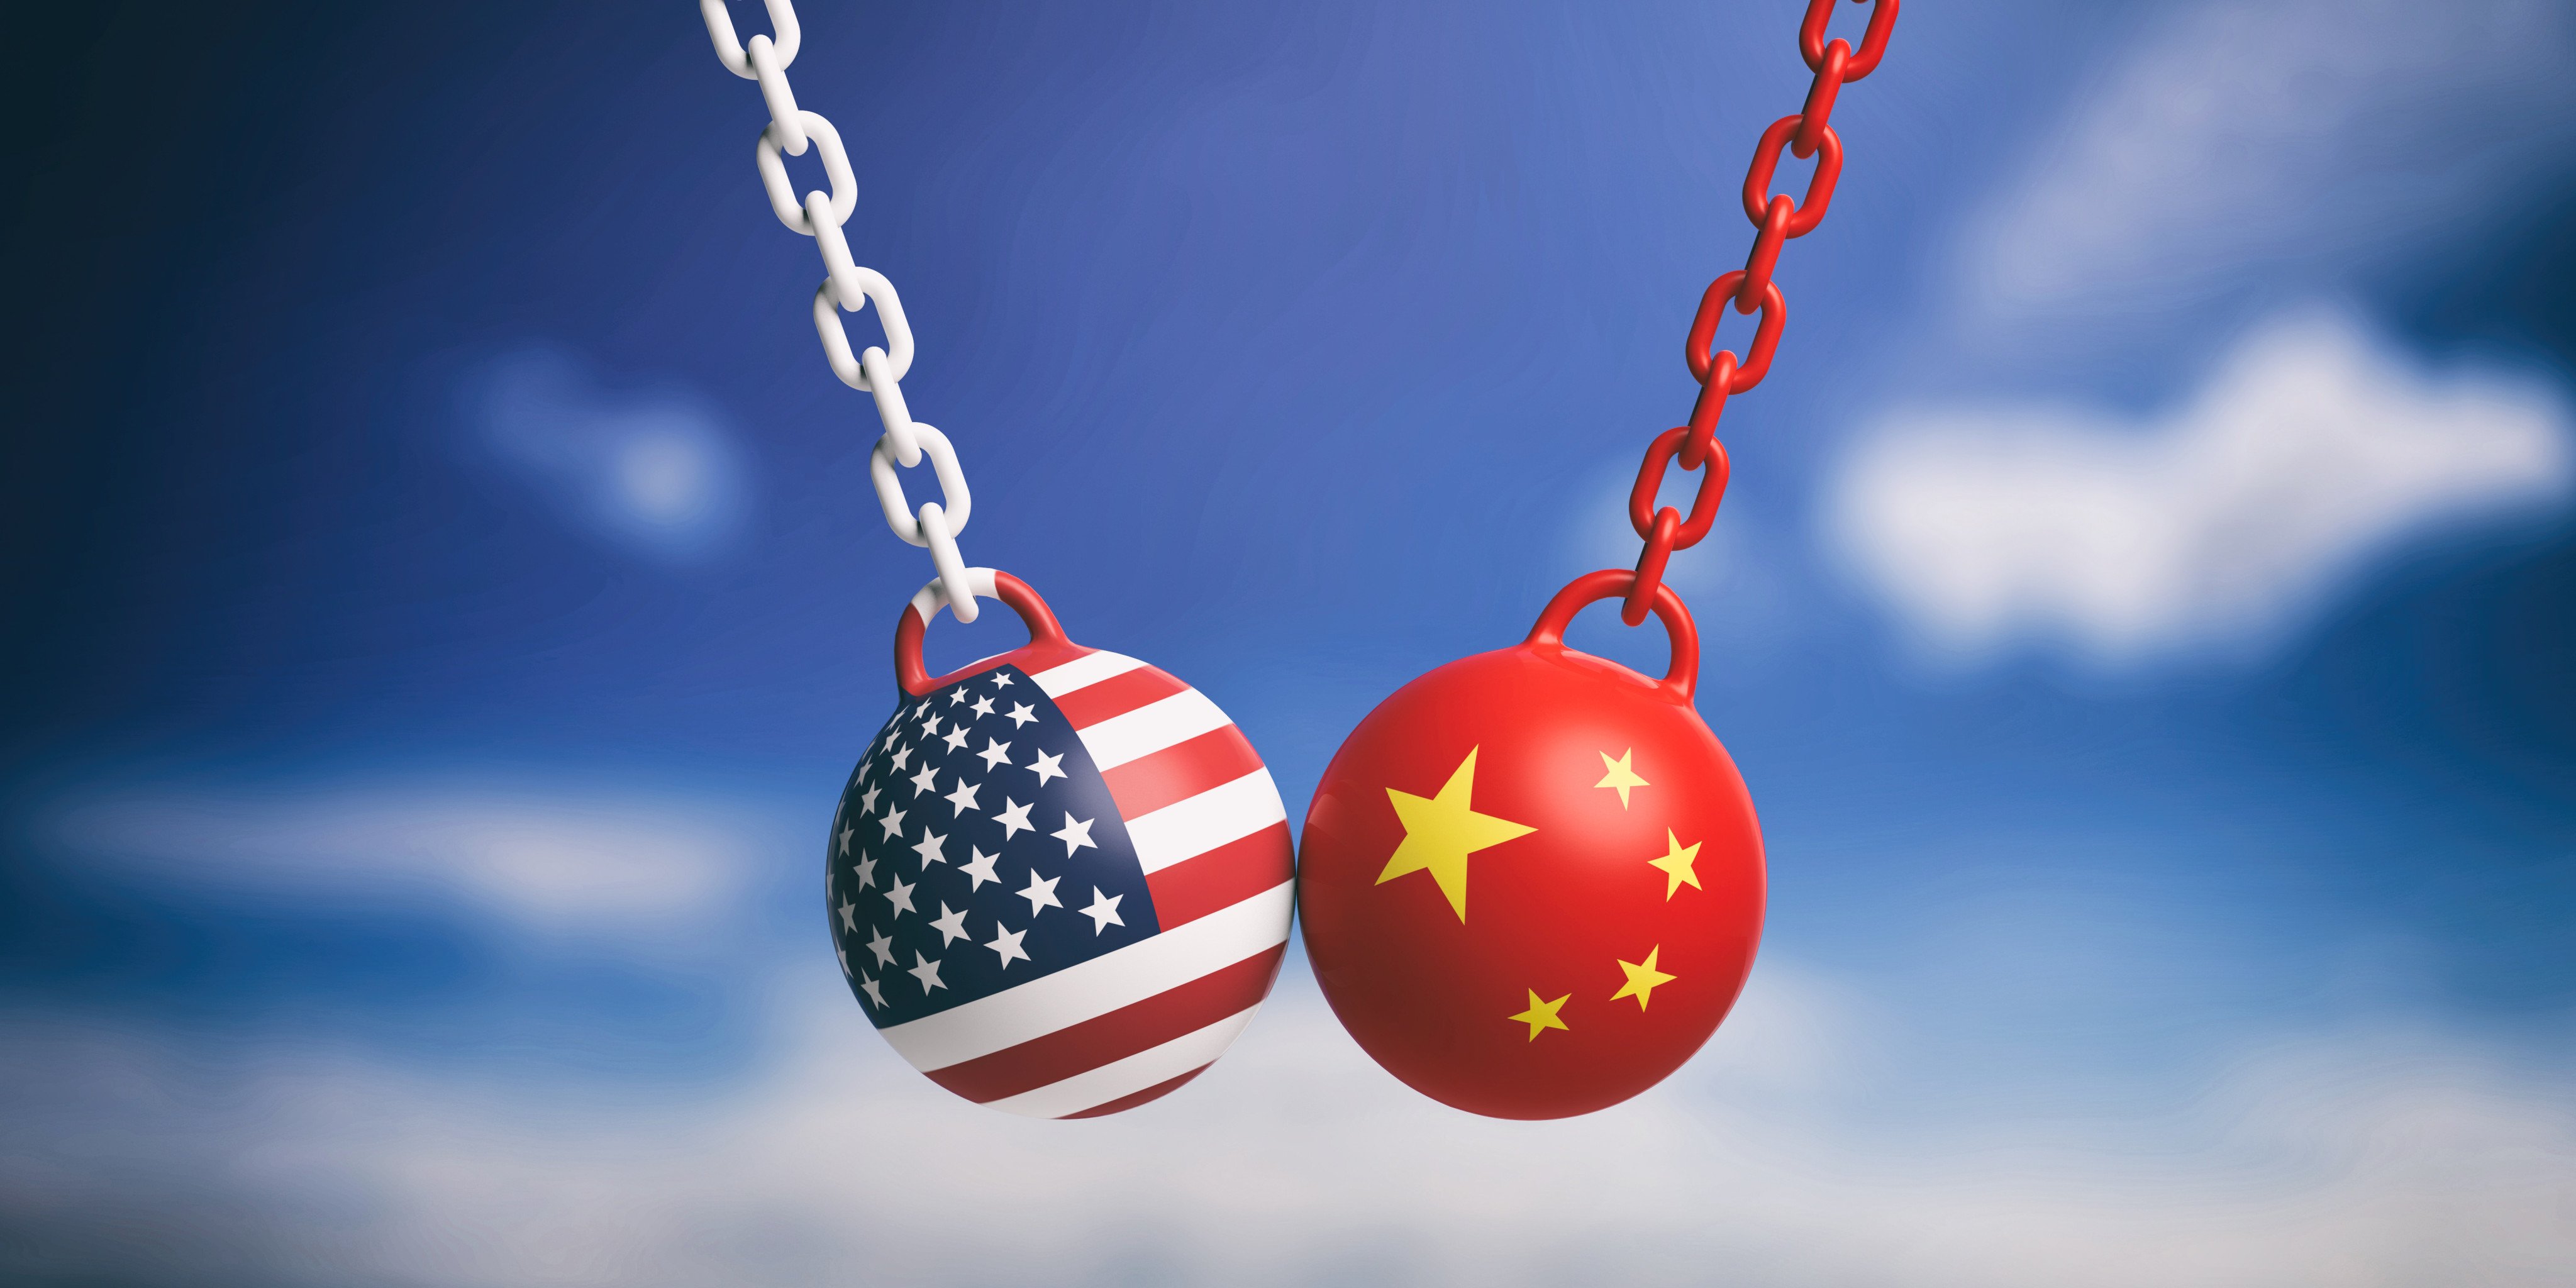 The virtual summit between the US and Chinese presidents has been followed by yet more confrontation. Photo: Shutterstock